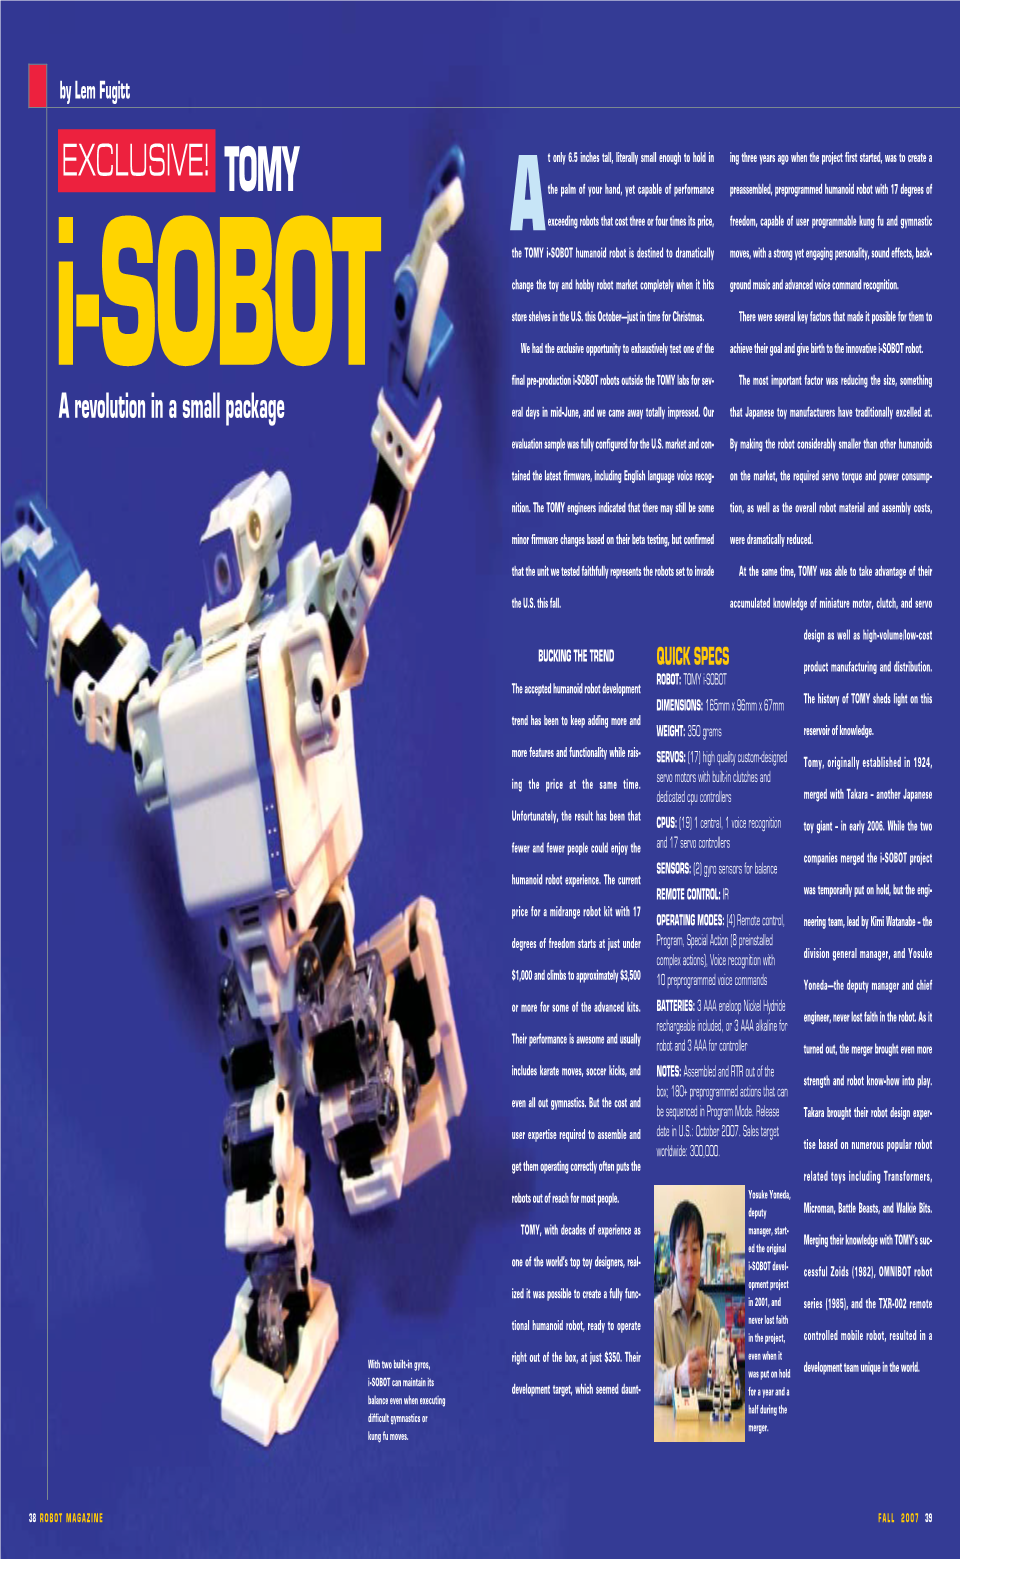 Tomy Isobot Fall 07.Qxd